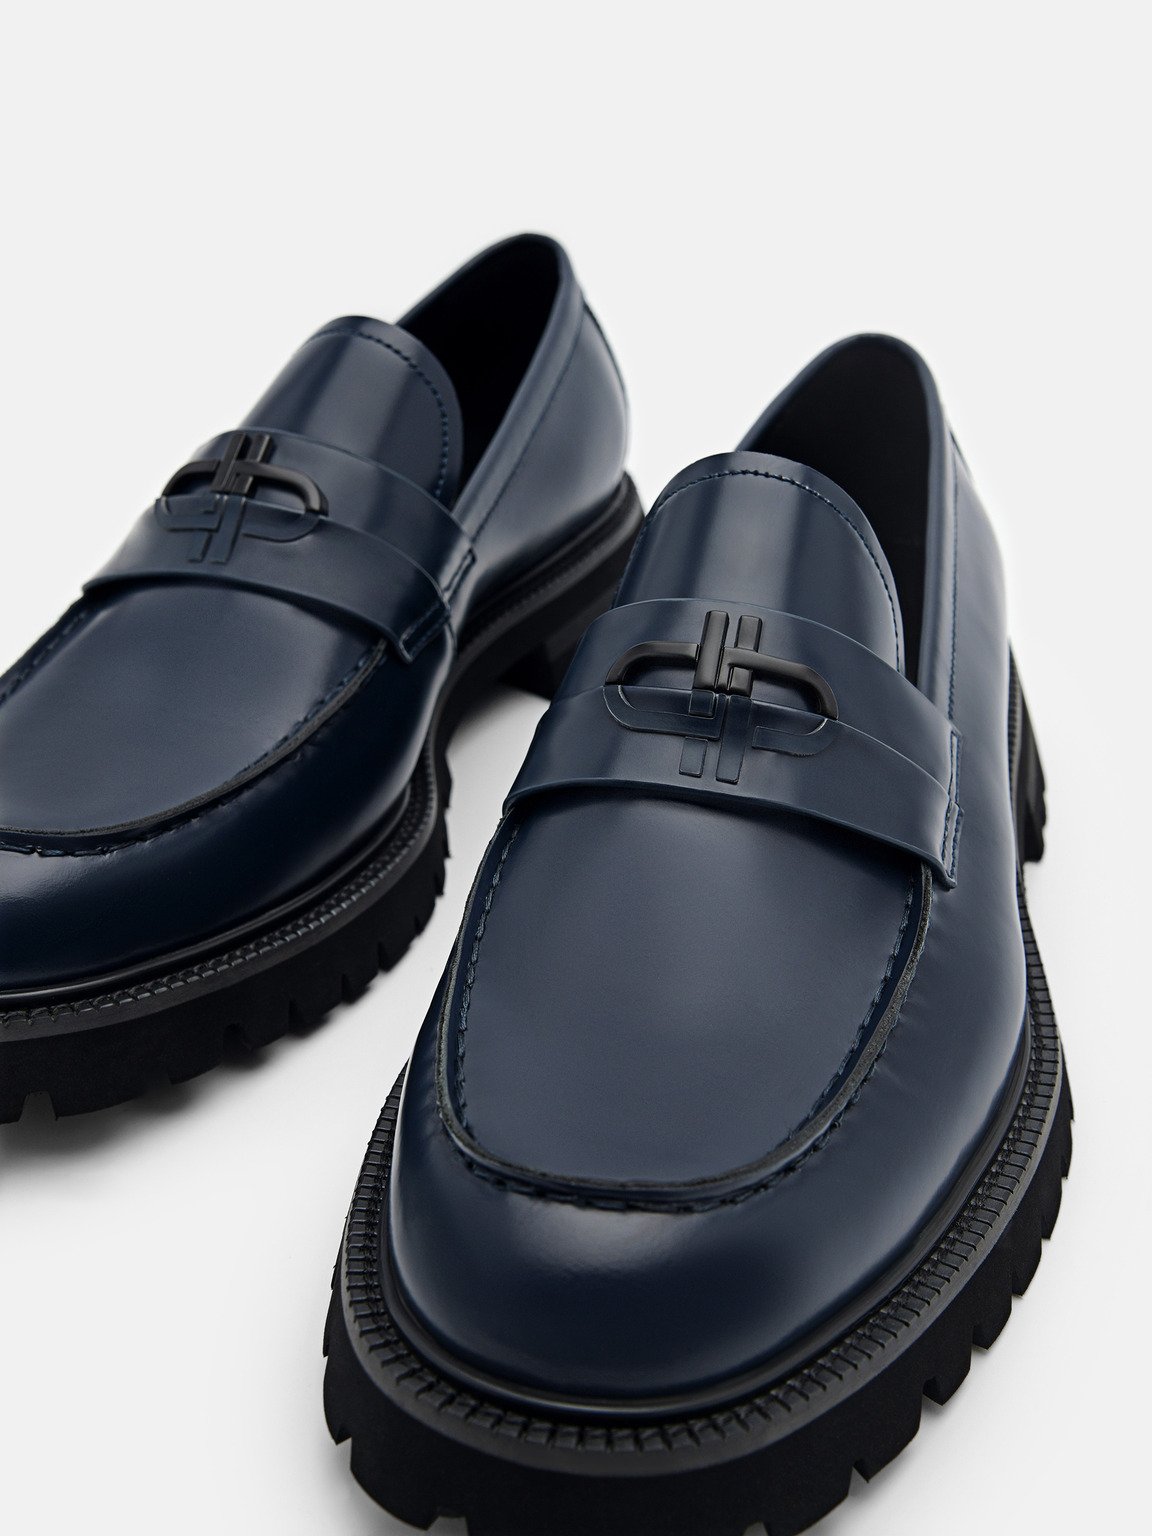 PEDRO Icon Leather Loafers, Navy